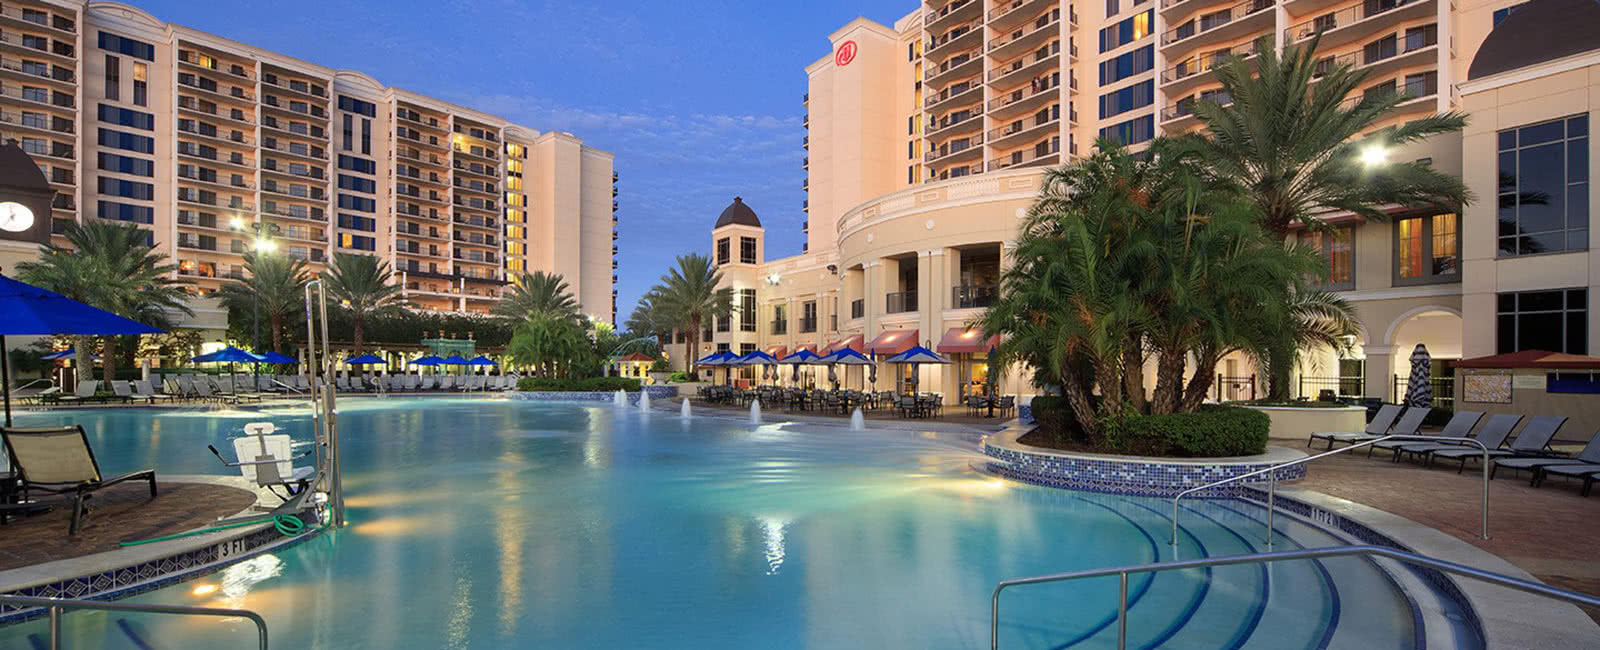 Pool Area of Parc Soleil by Hilton Grand Vacations Club in Orlando, Florida